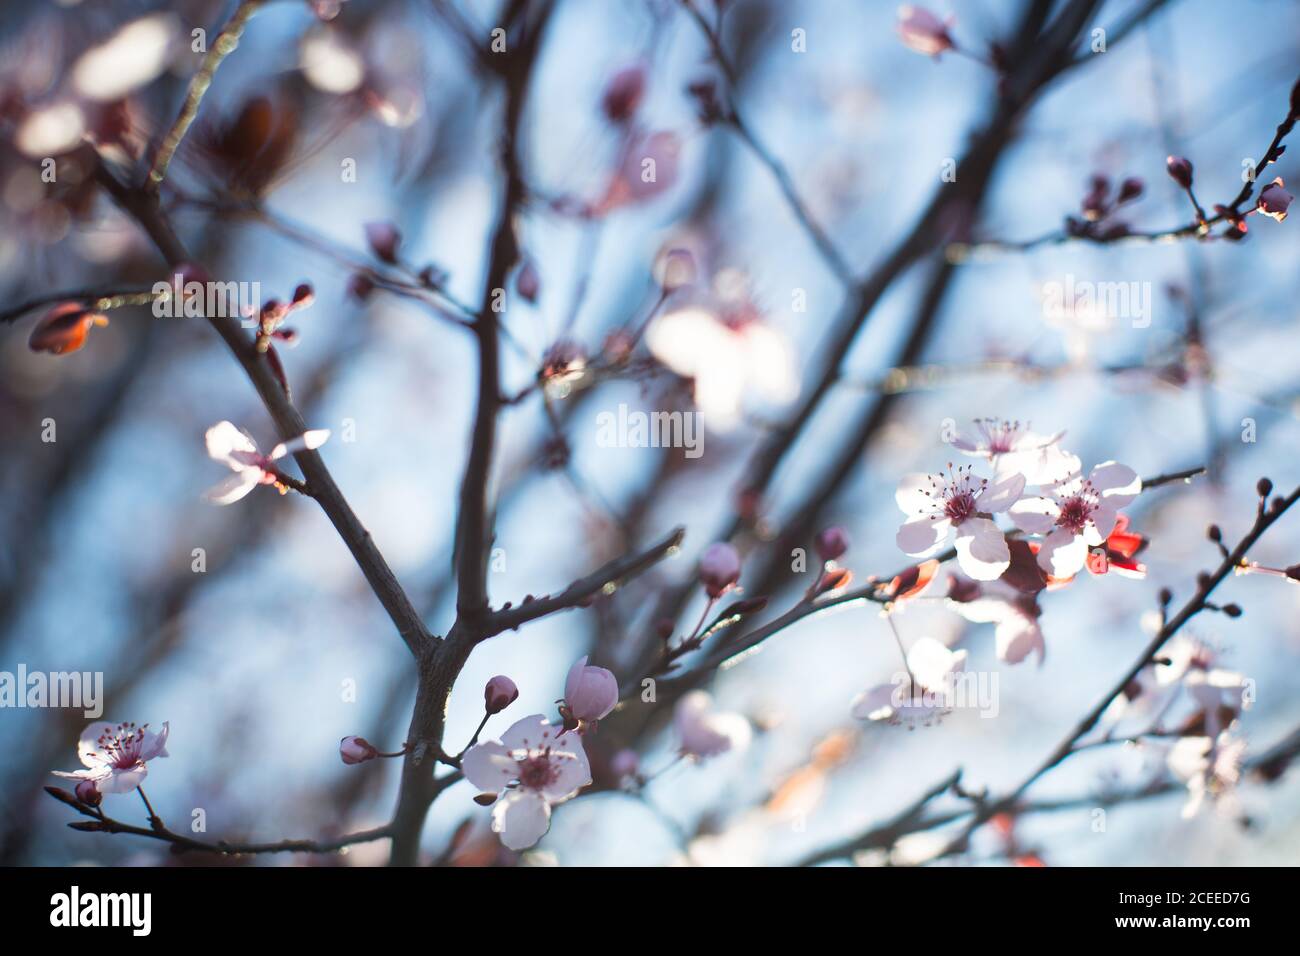 Close-up thin branches with small pink flowers on blue background. Stock Photo